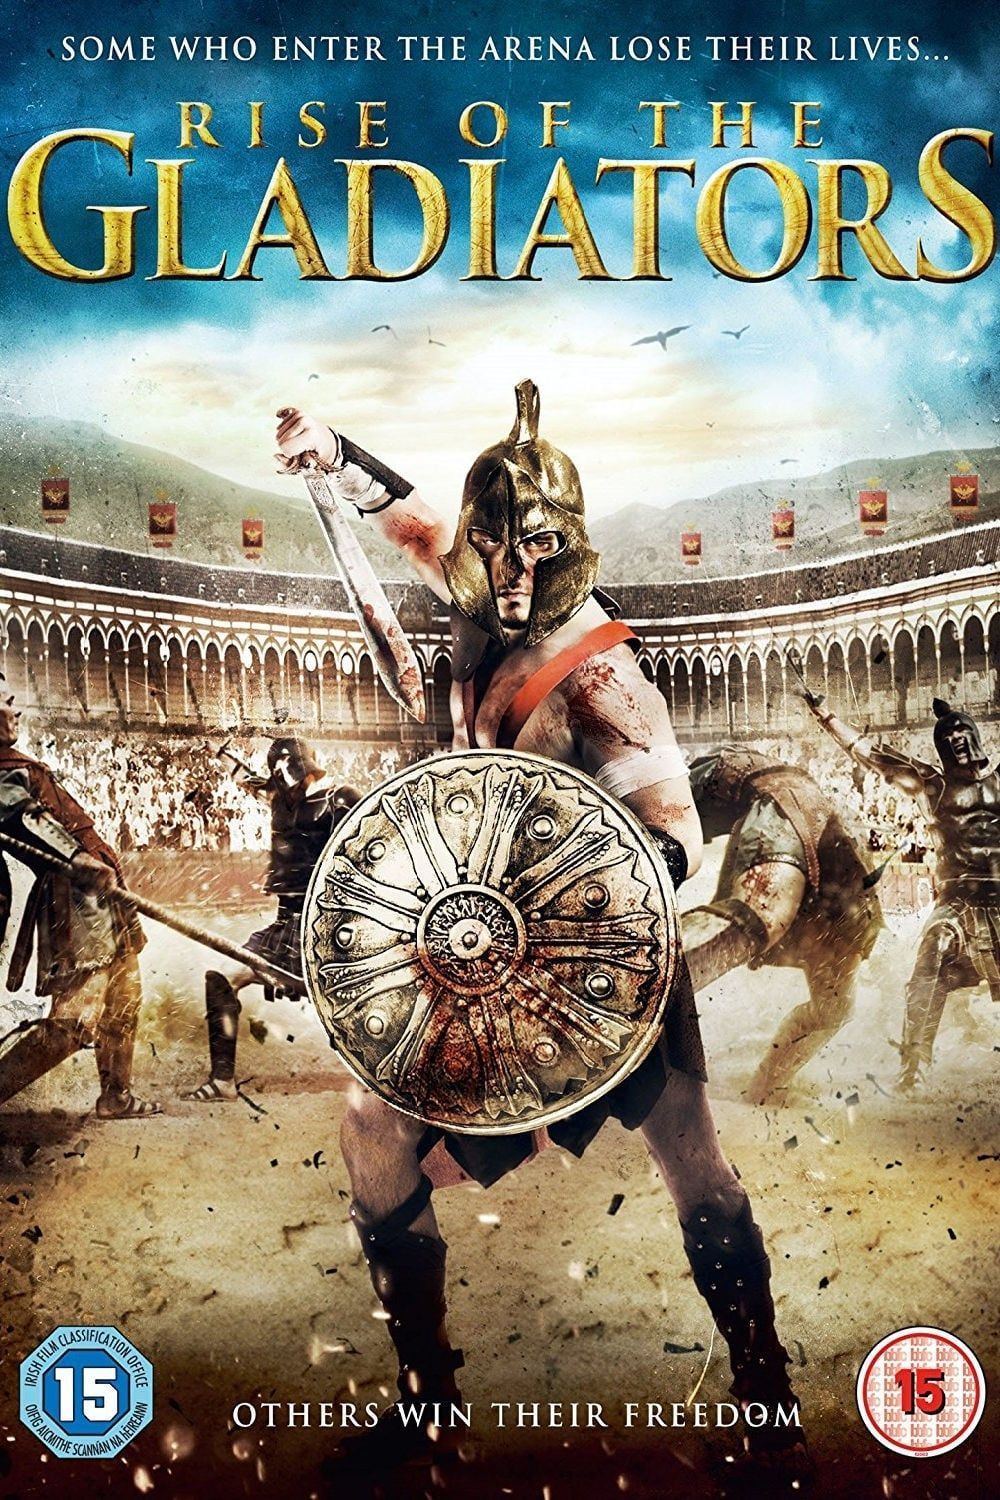 adam gould recommends gladiator movie free online pic